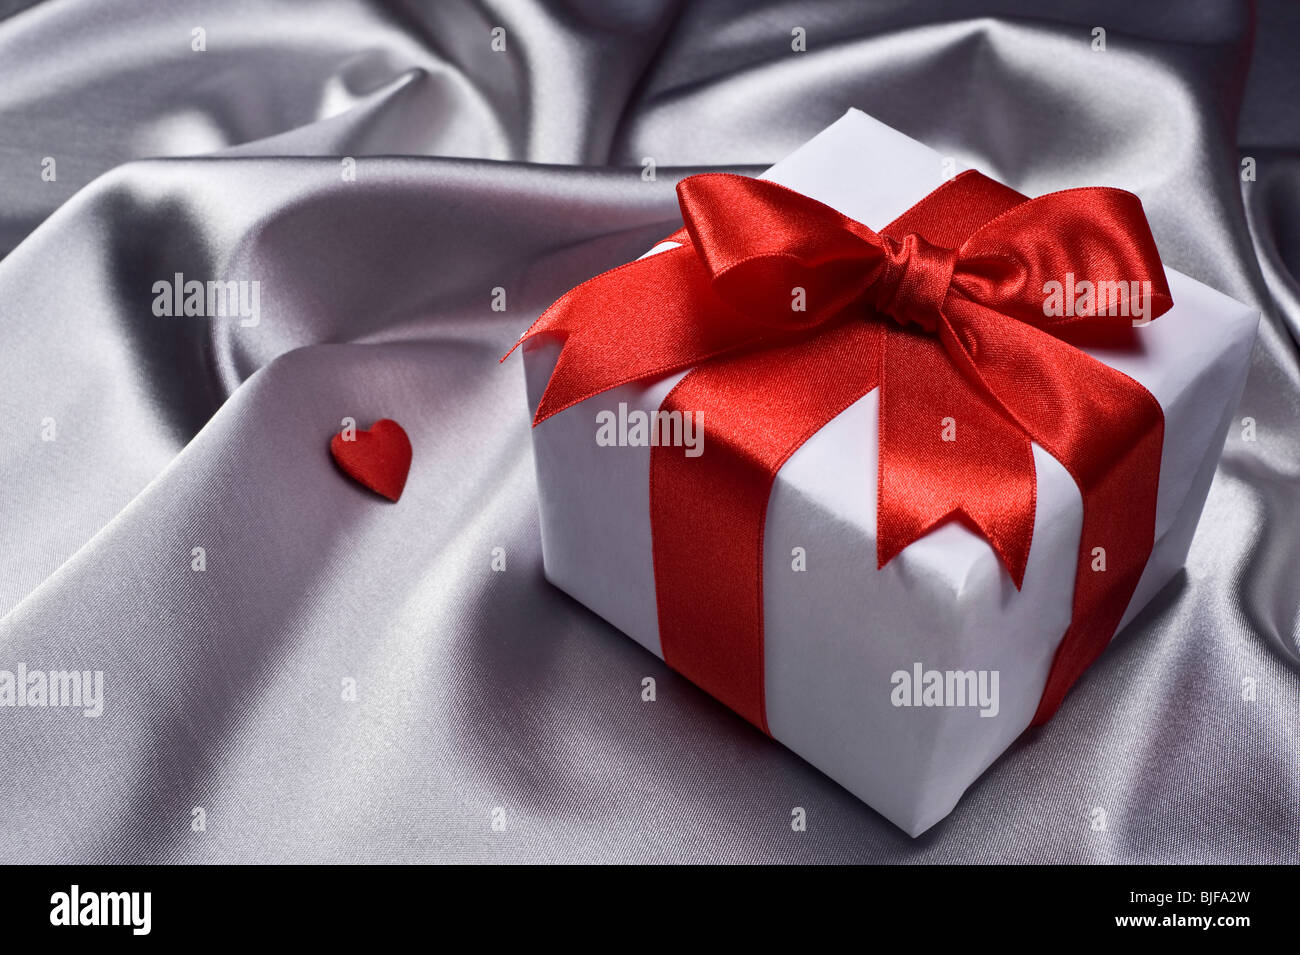 gift with decorative red ribbon on silver silk background Stock Photo